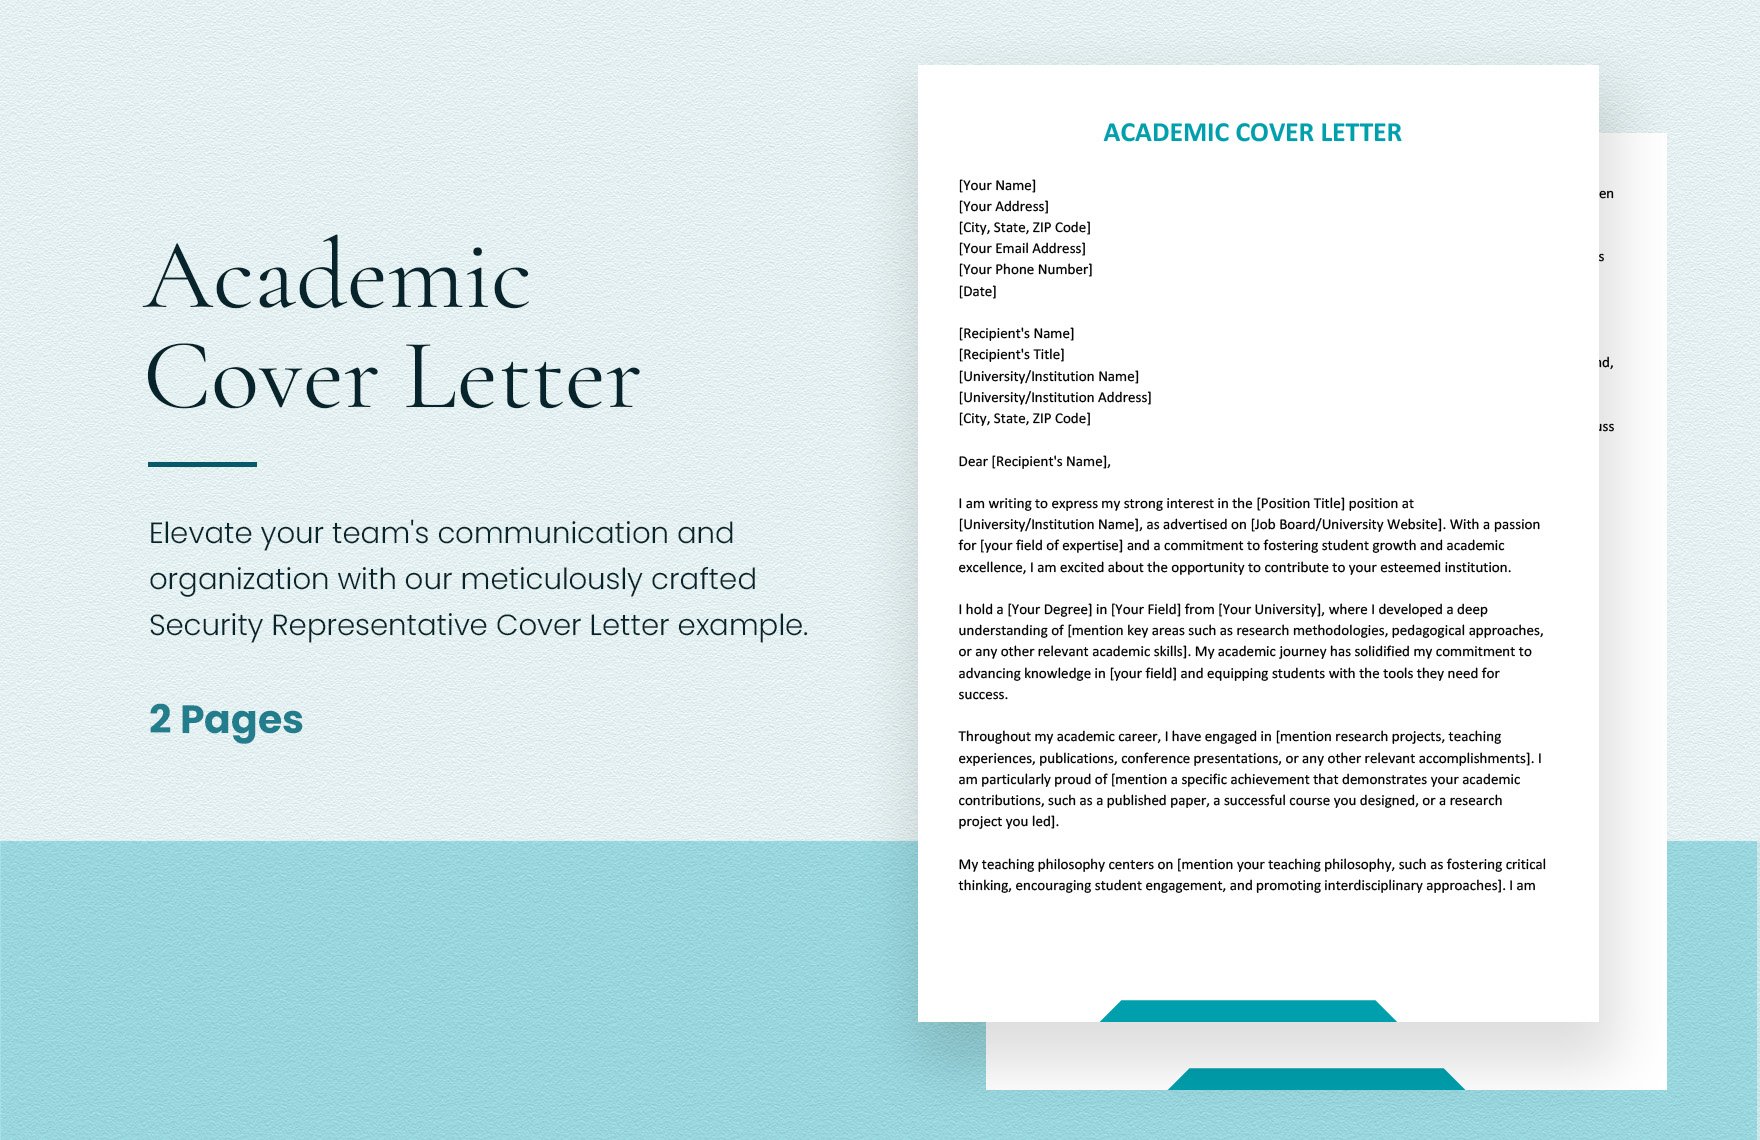 Academic Cover Letter in Word, Google Docs